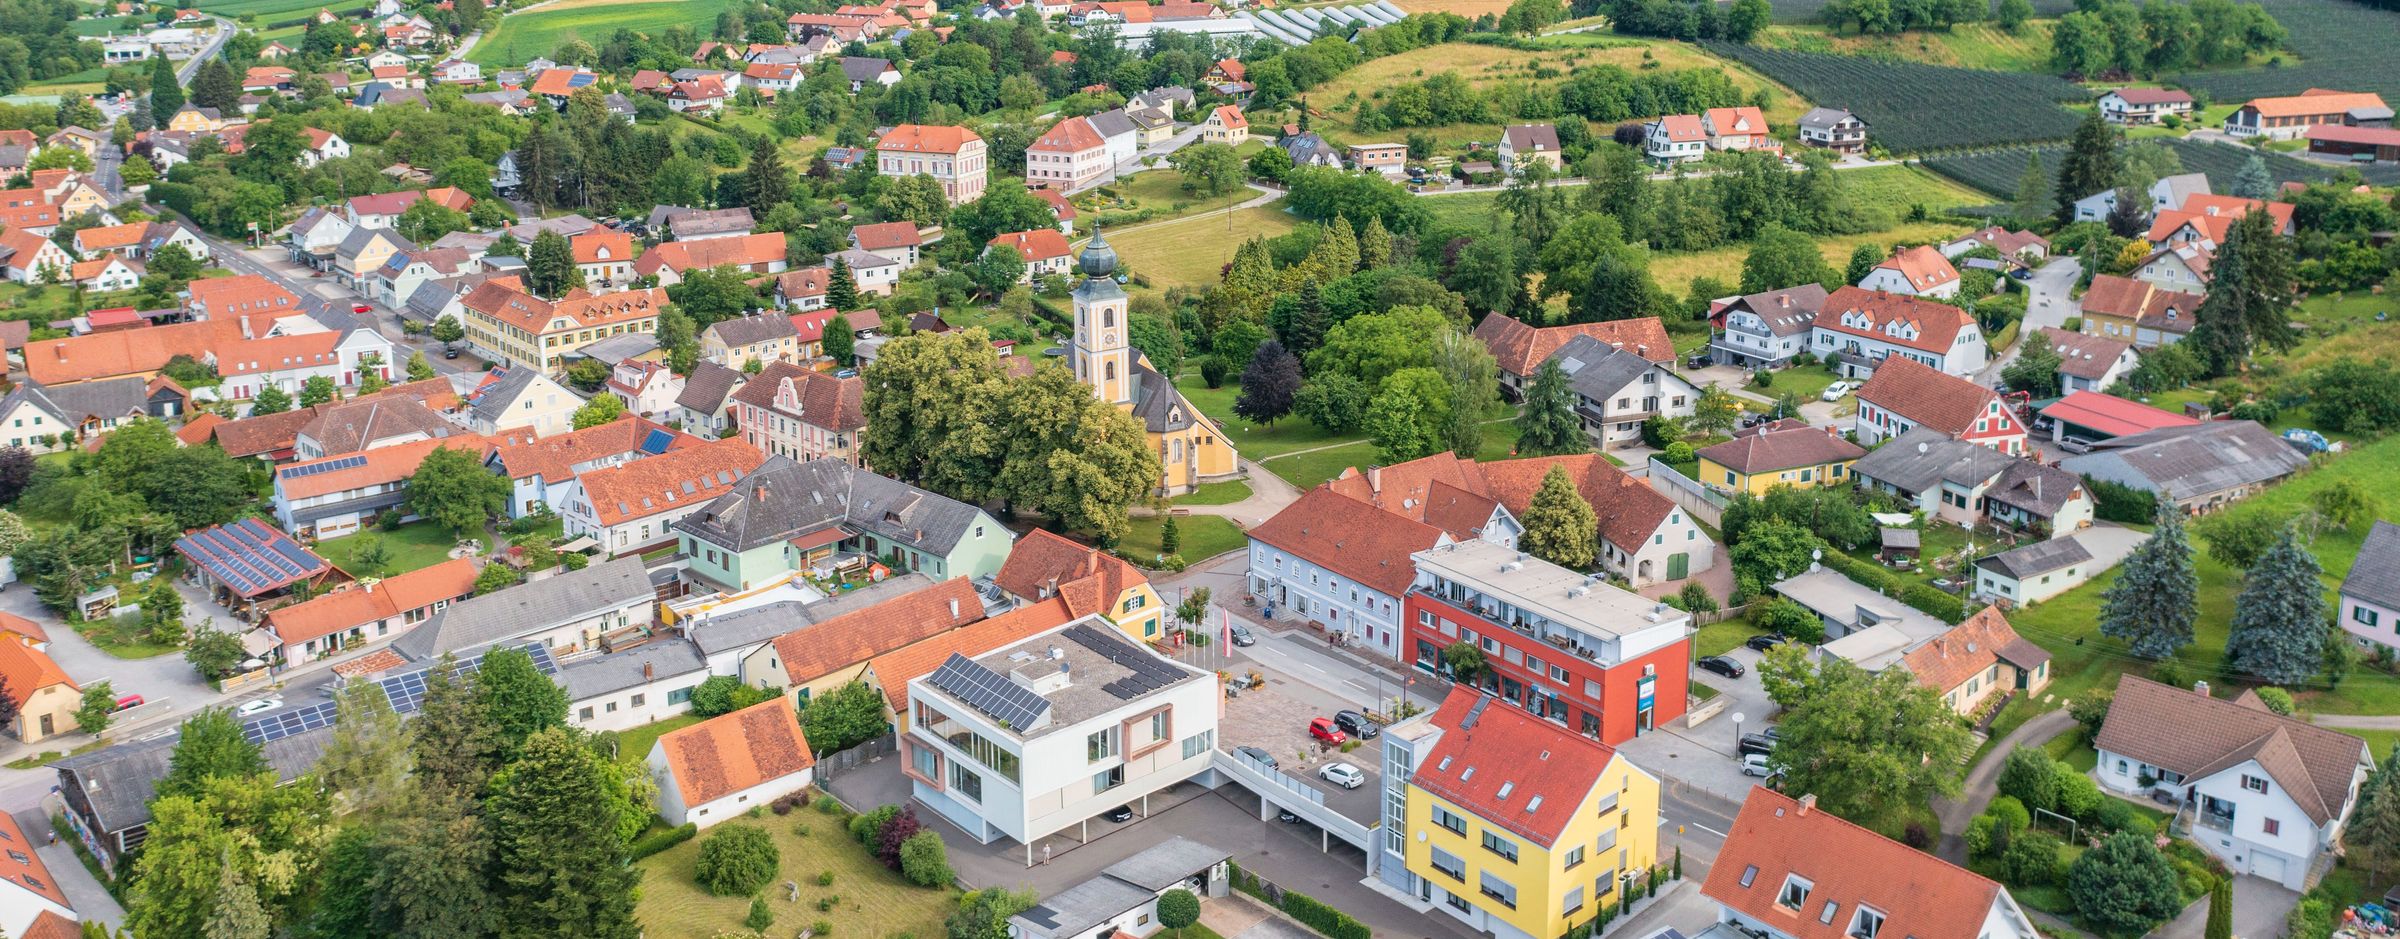 Bild enthält, Building, Outdoors, Cityscape, Urban, Nature, Countryside, Housing, Village, Aerial View, House